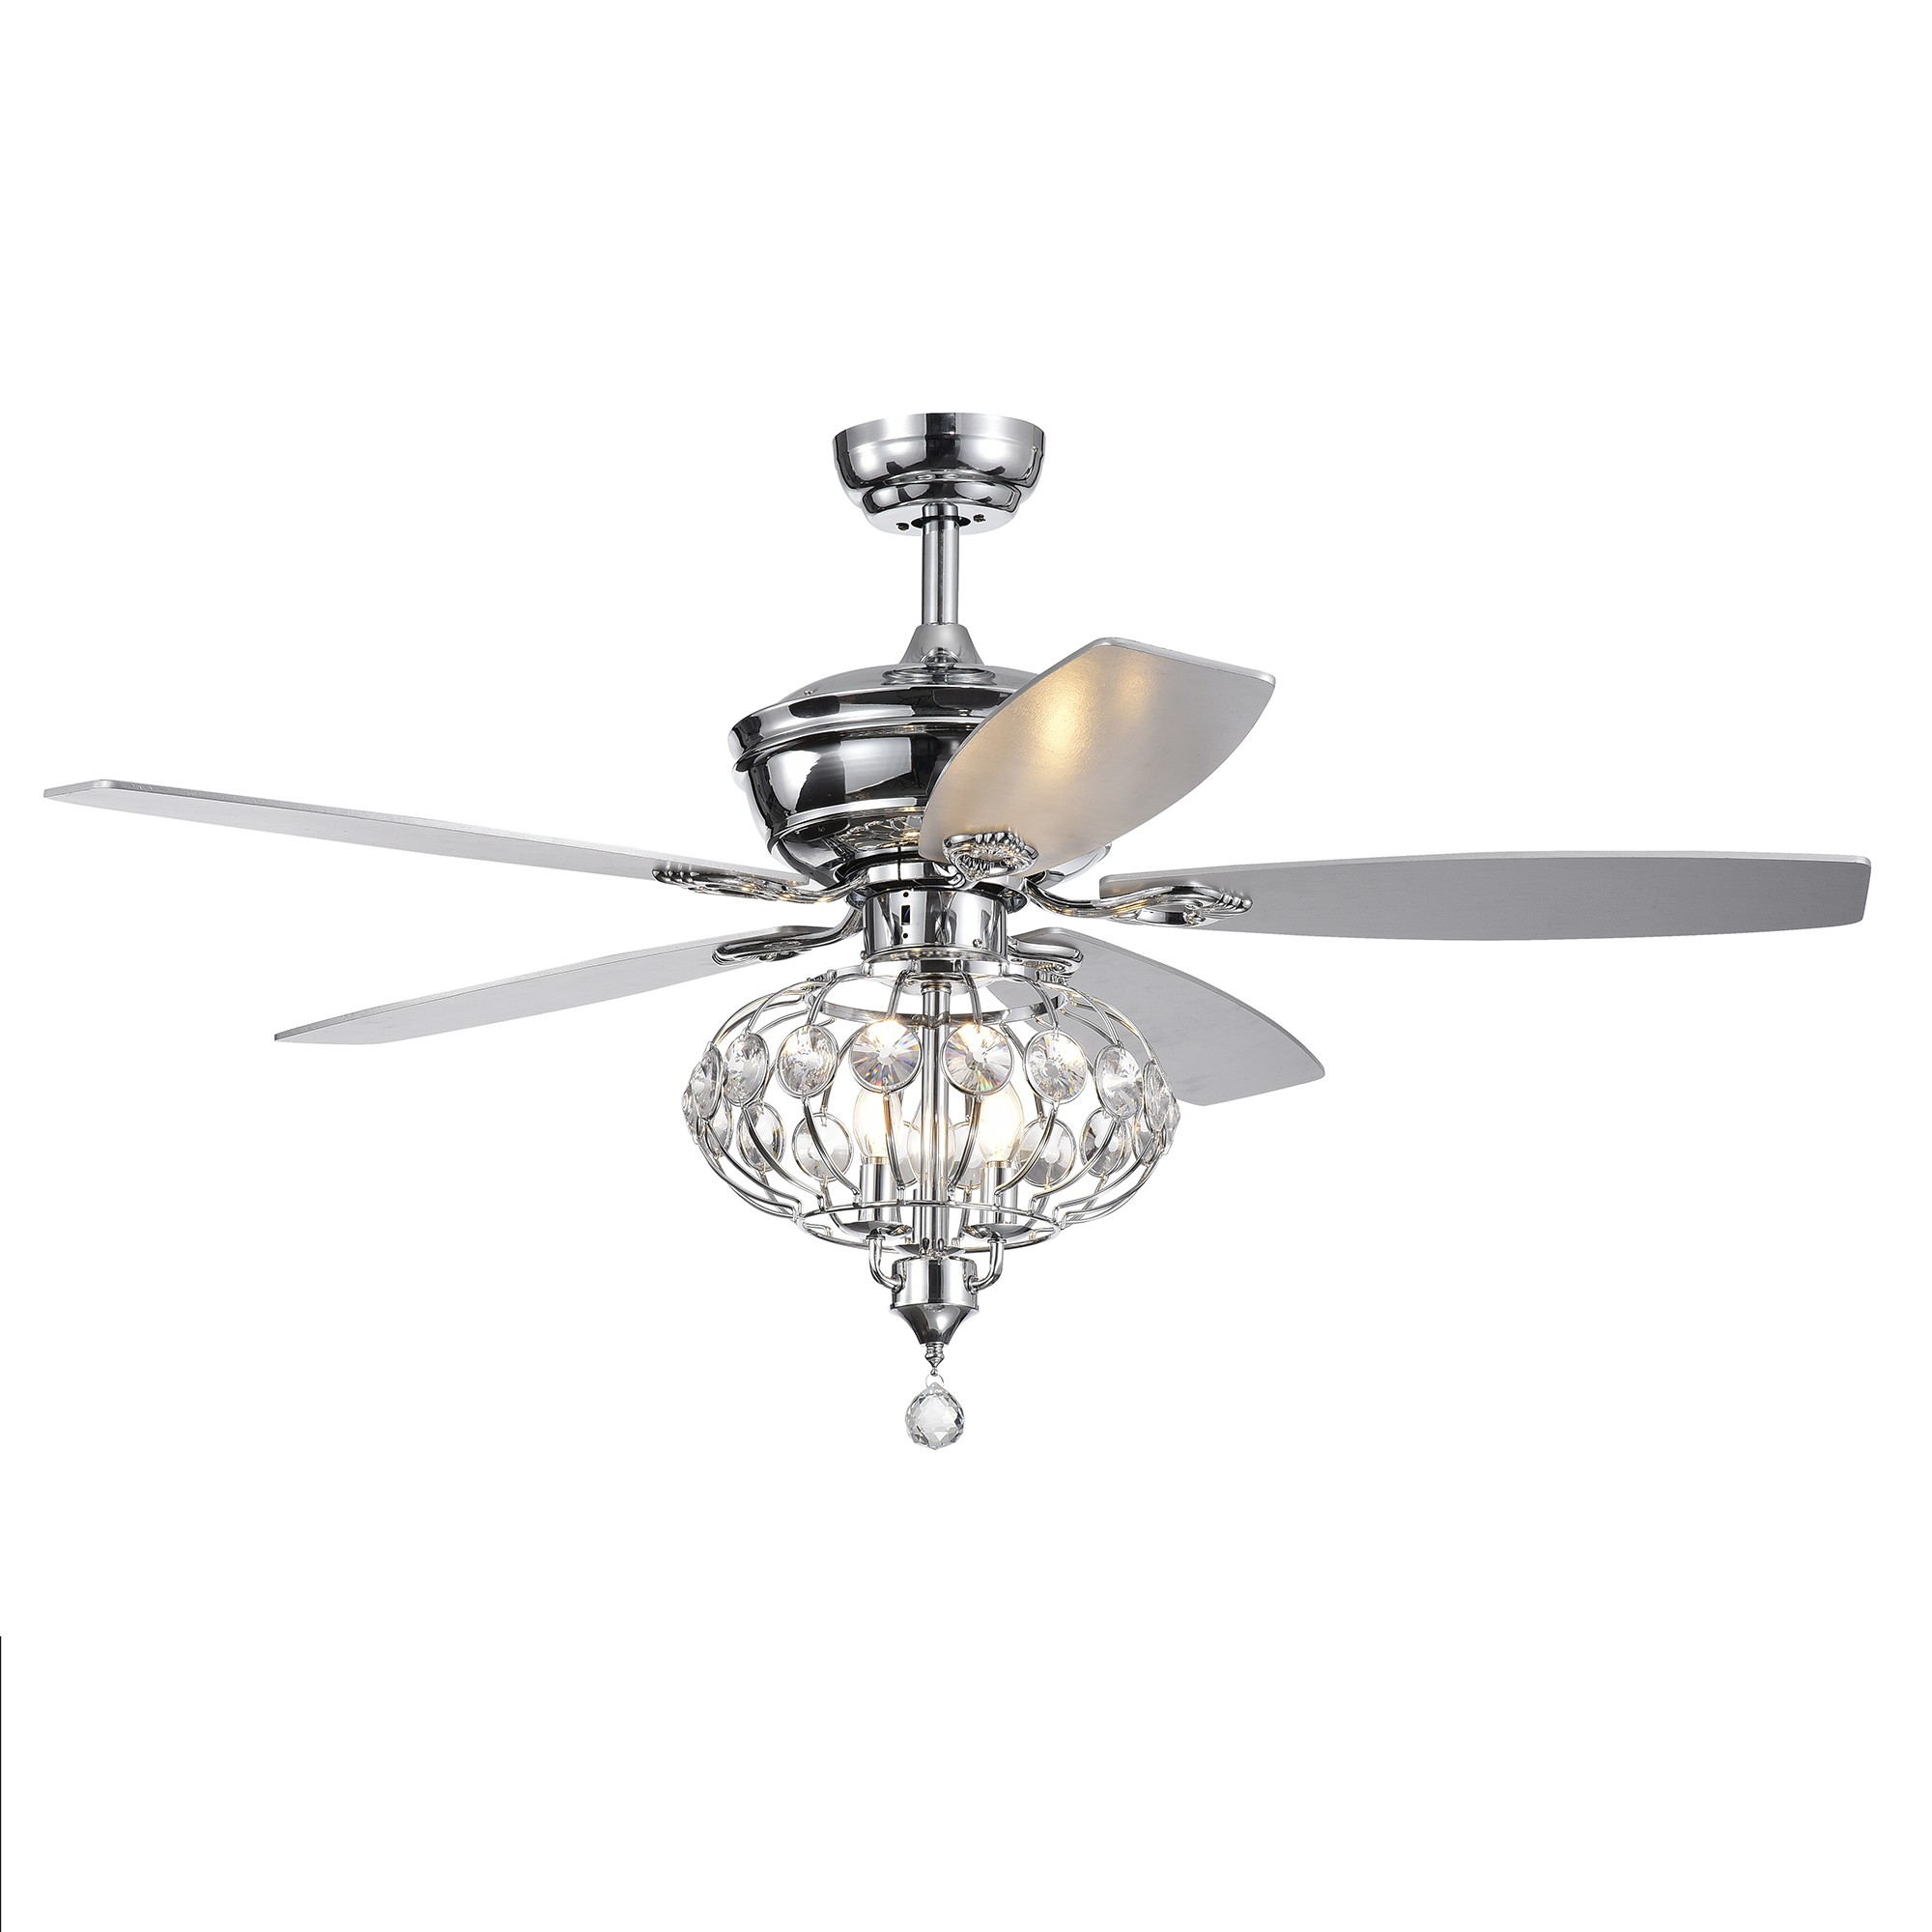 Silver Orchid Finlayson 52-inch Lighted Ceiling Fan with Reversible Blades